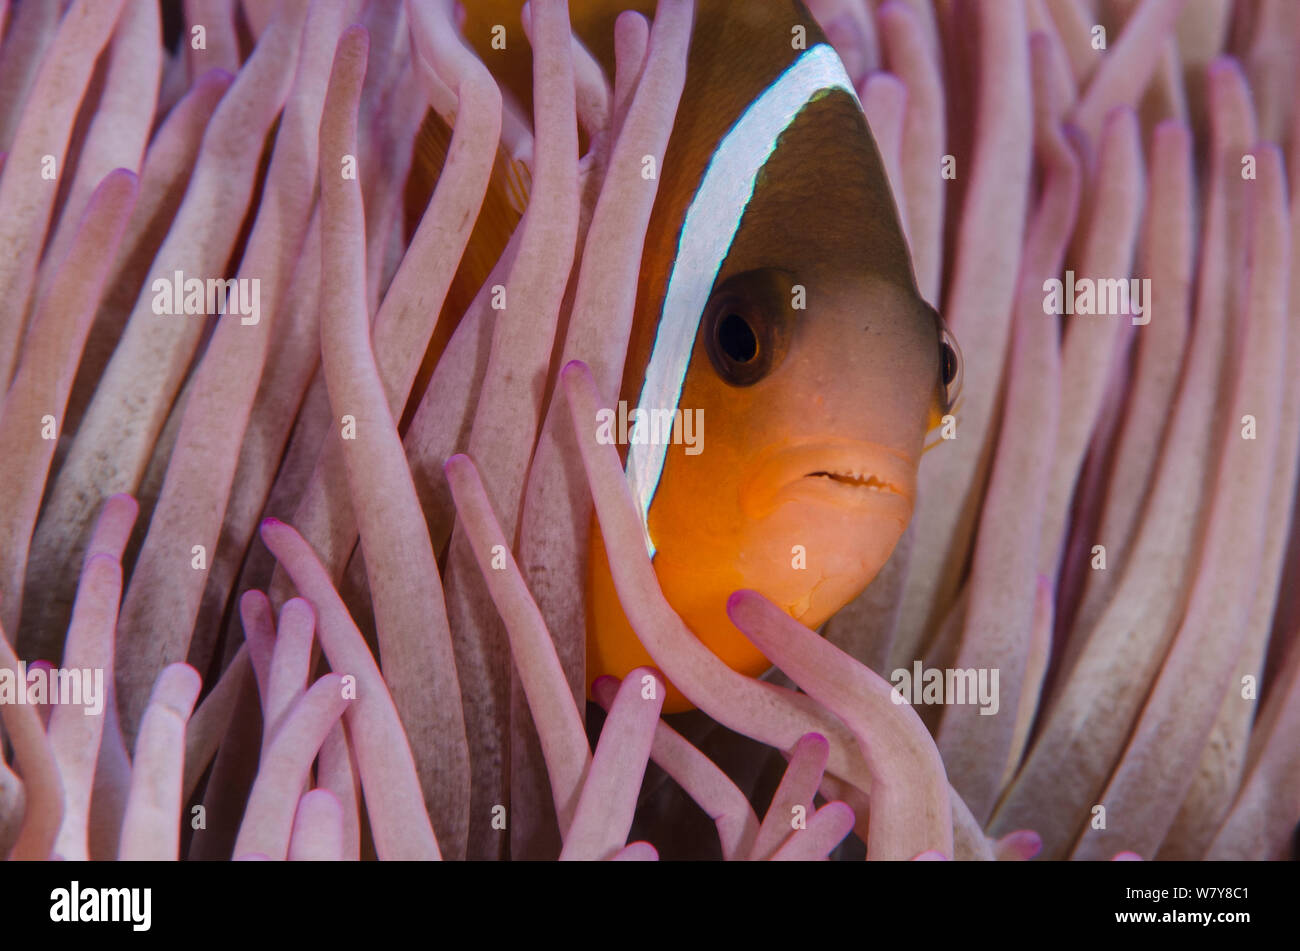 Fiji anemonefish (Amphiprion barberi) sheltering in host anemone for protection. Fiji, South Pacific. Stock Photo